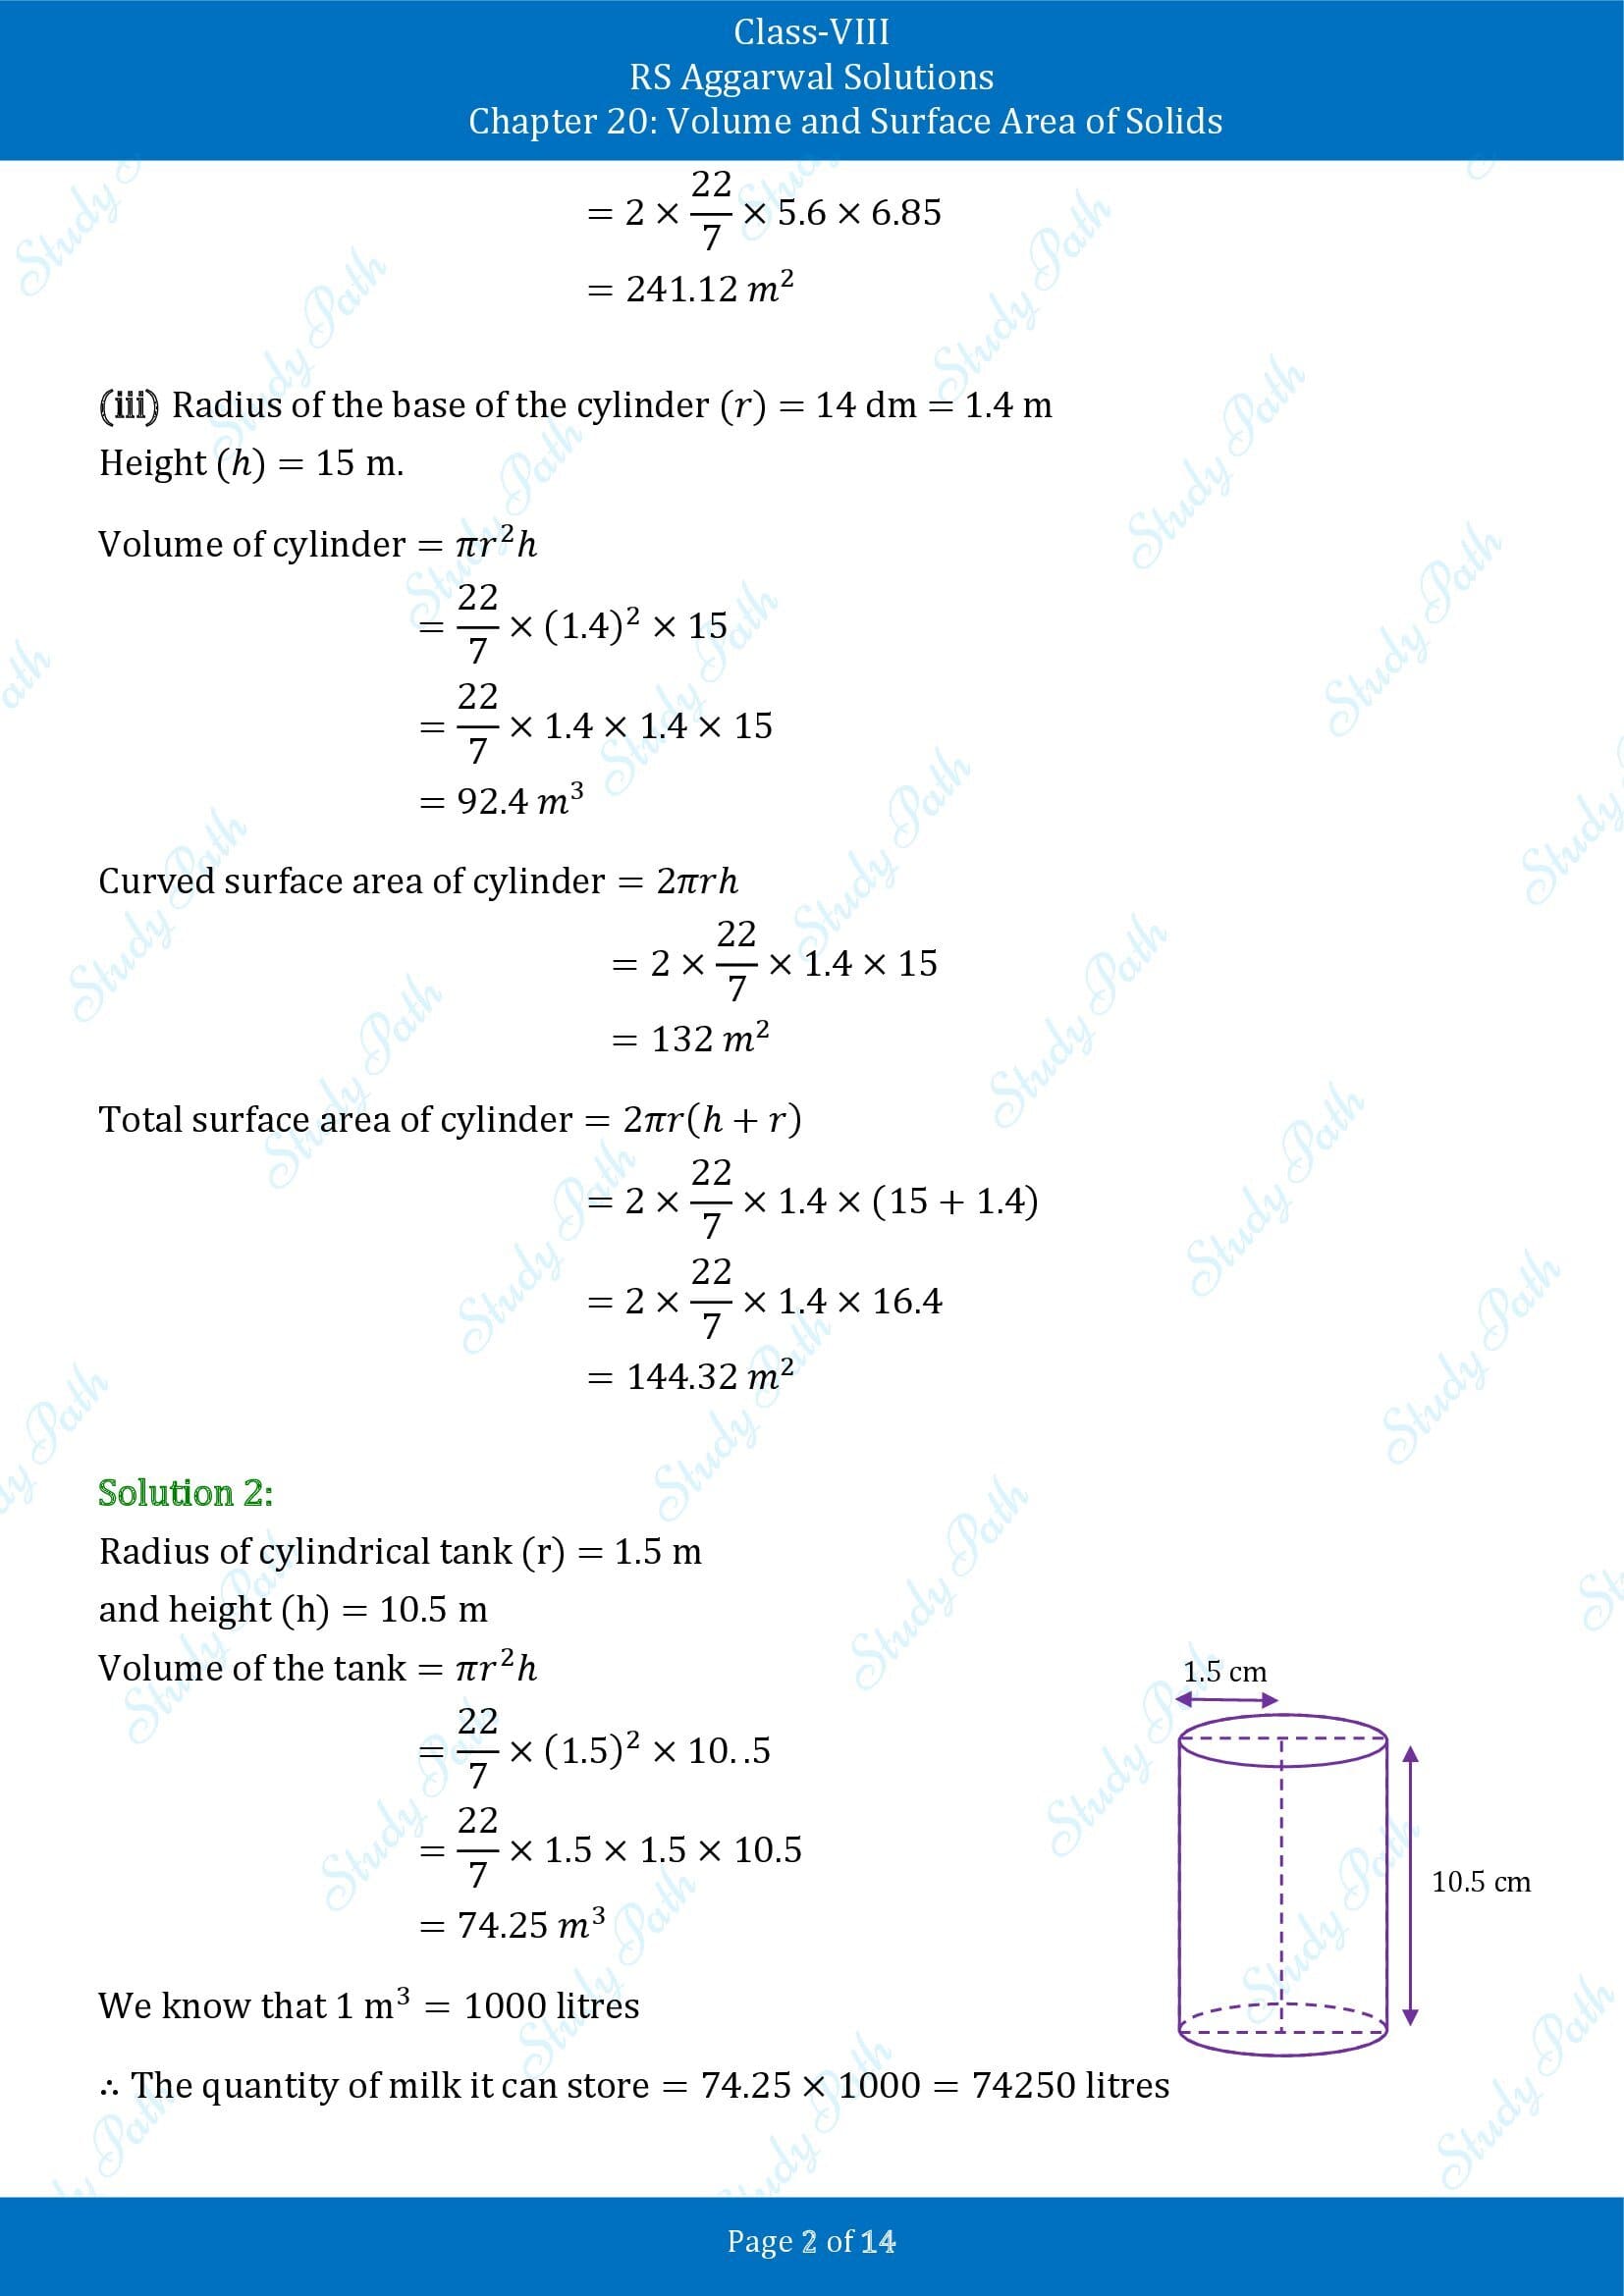 RS Aggarwal Solutions Class 8 Chapter 20 Volume and Surface Area of Solids Exercise 20B 00002